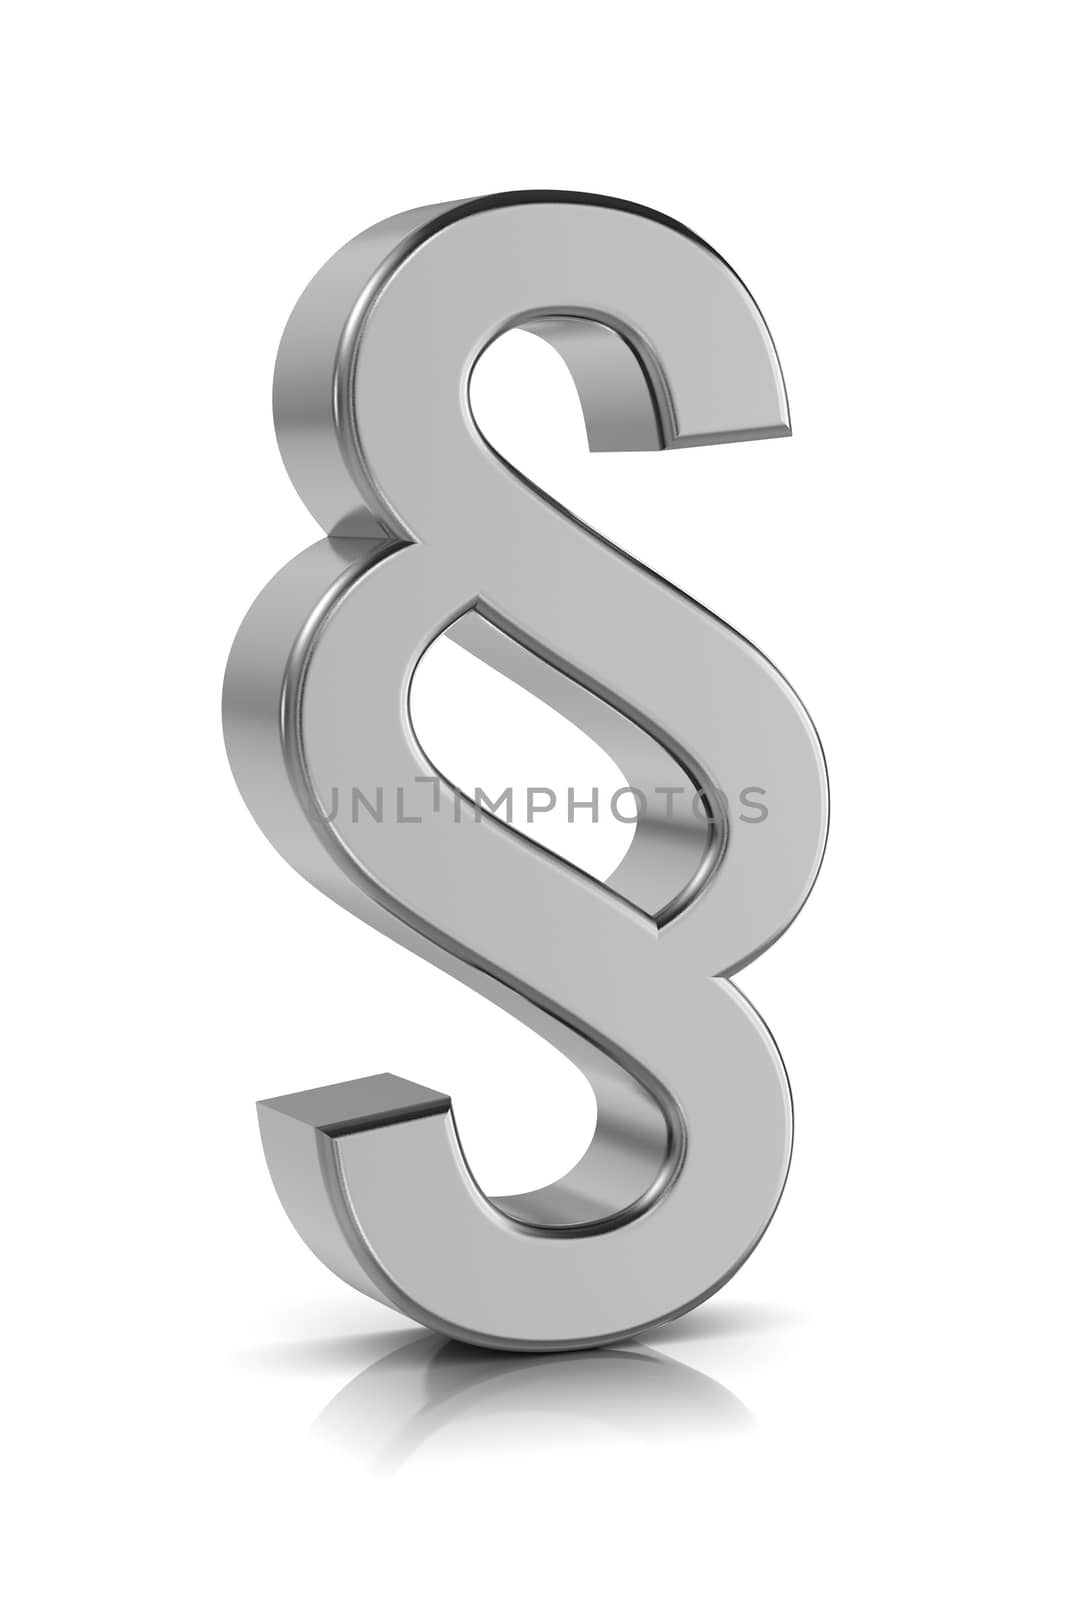 3D Paragraph Metal Symbol Standing on White Background